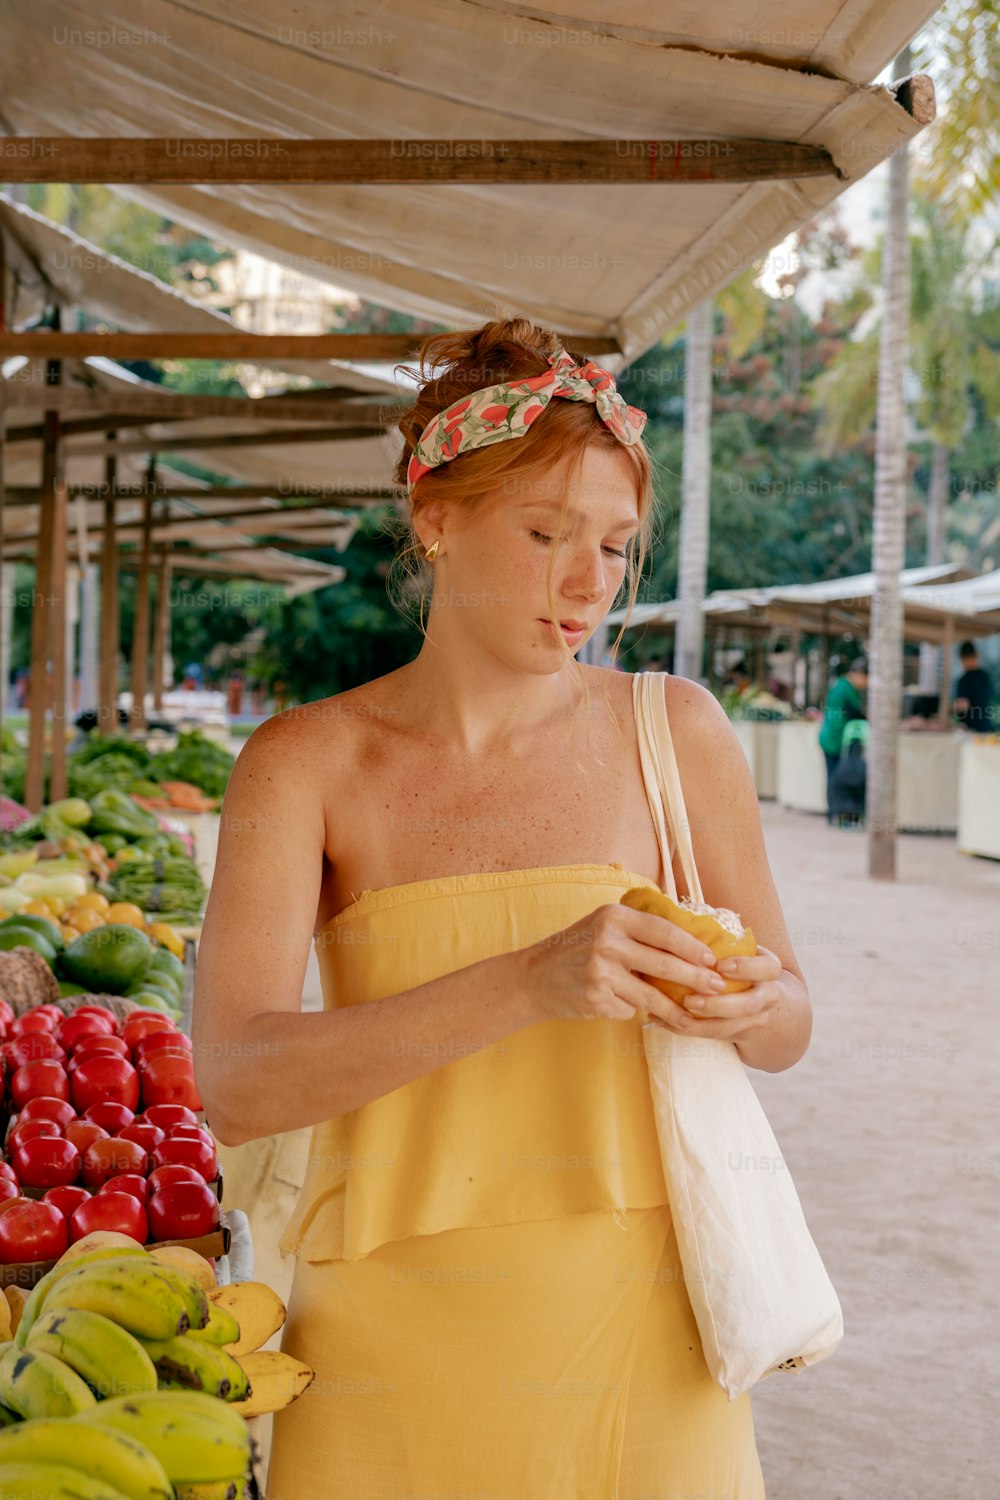 a woman in a yellow dress standing in front of a fruit stand